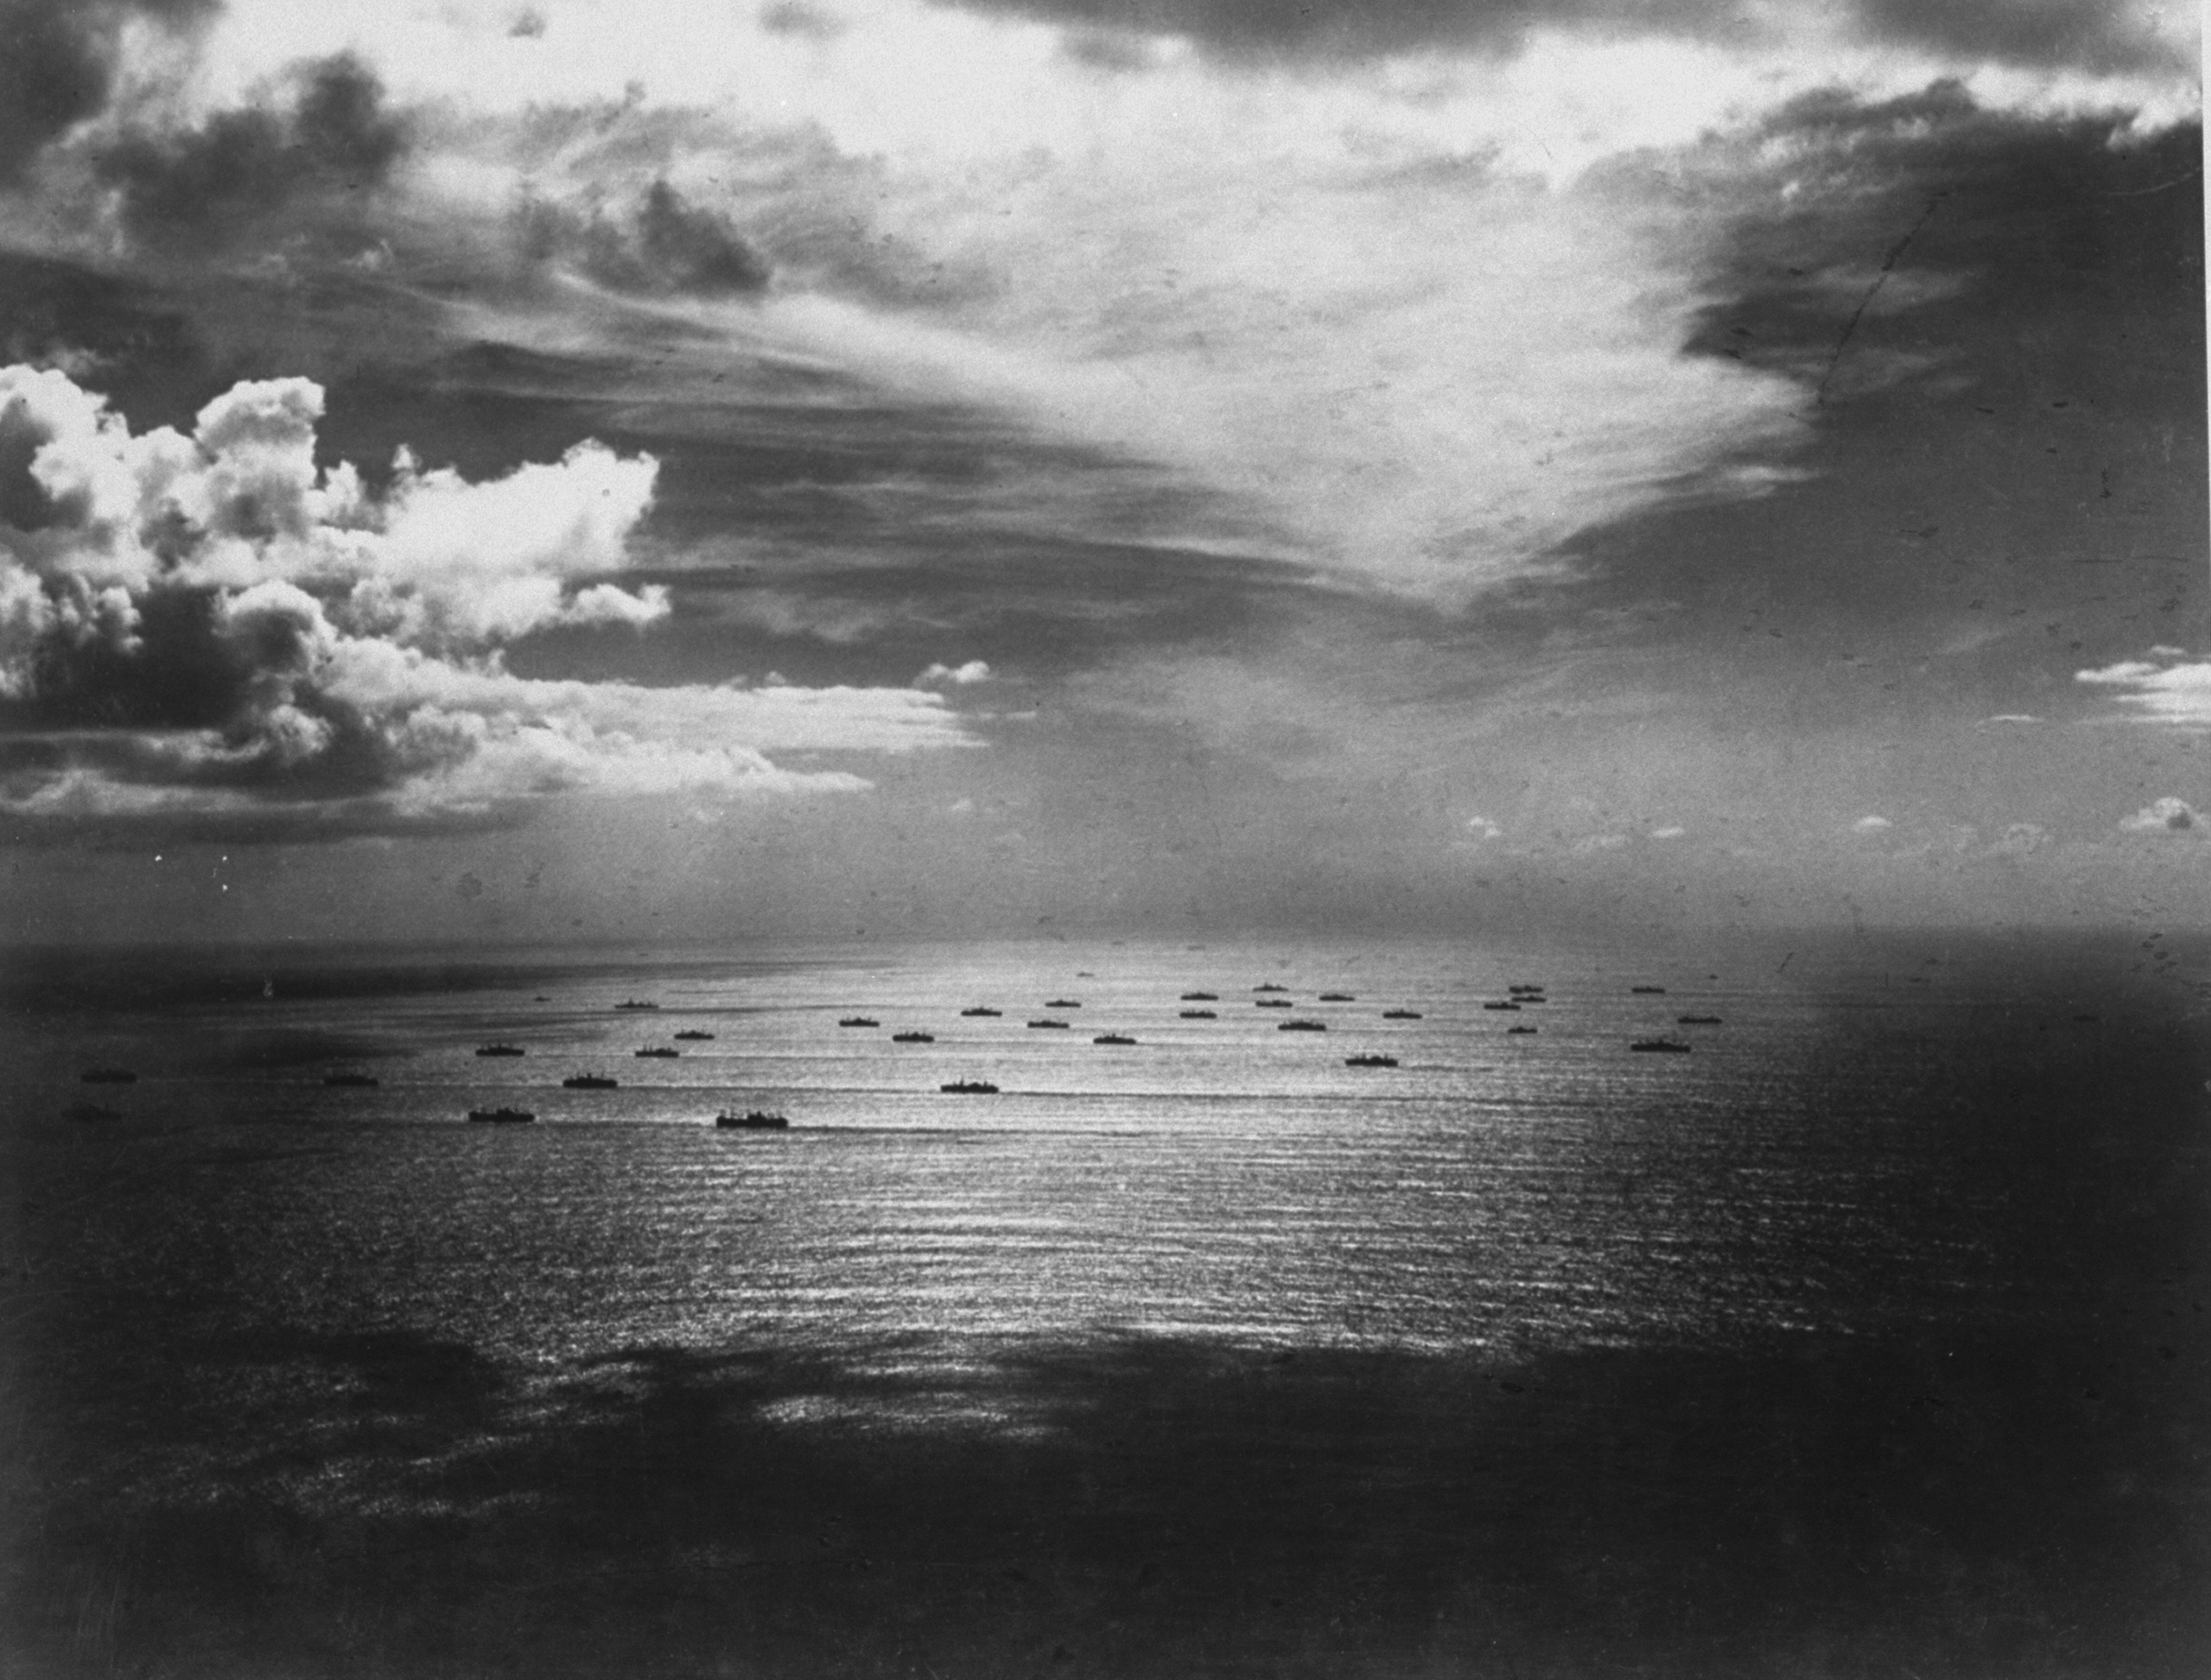 U.S. battleships in transit across the Atlantic to North Africa as part of Operation Torch. (The LIFE Picture Collection/Getty Images)